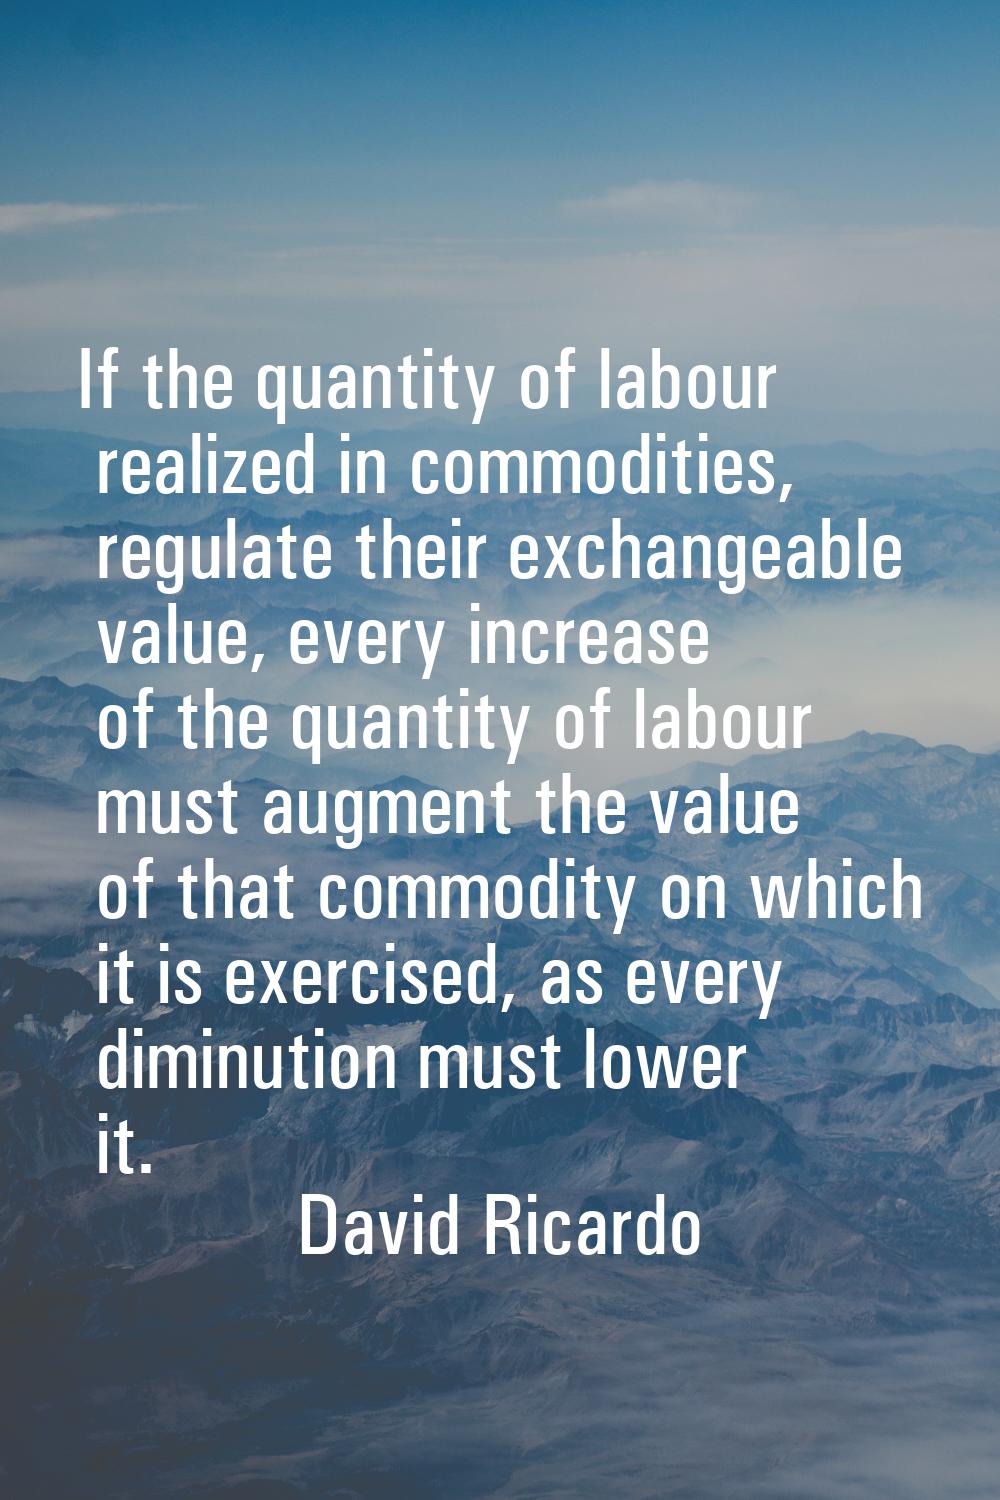 If the quantity of labour realized in commodities, regulate their exchangeable value, every increas